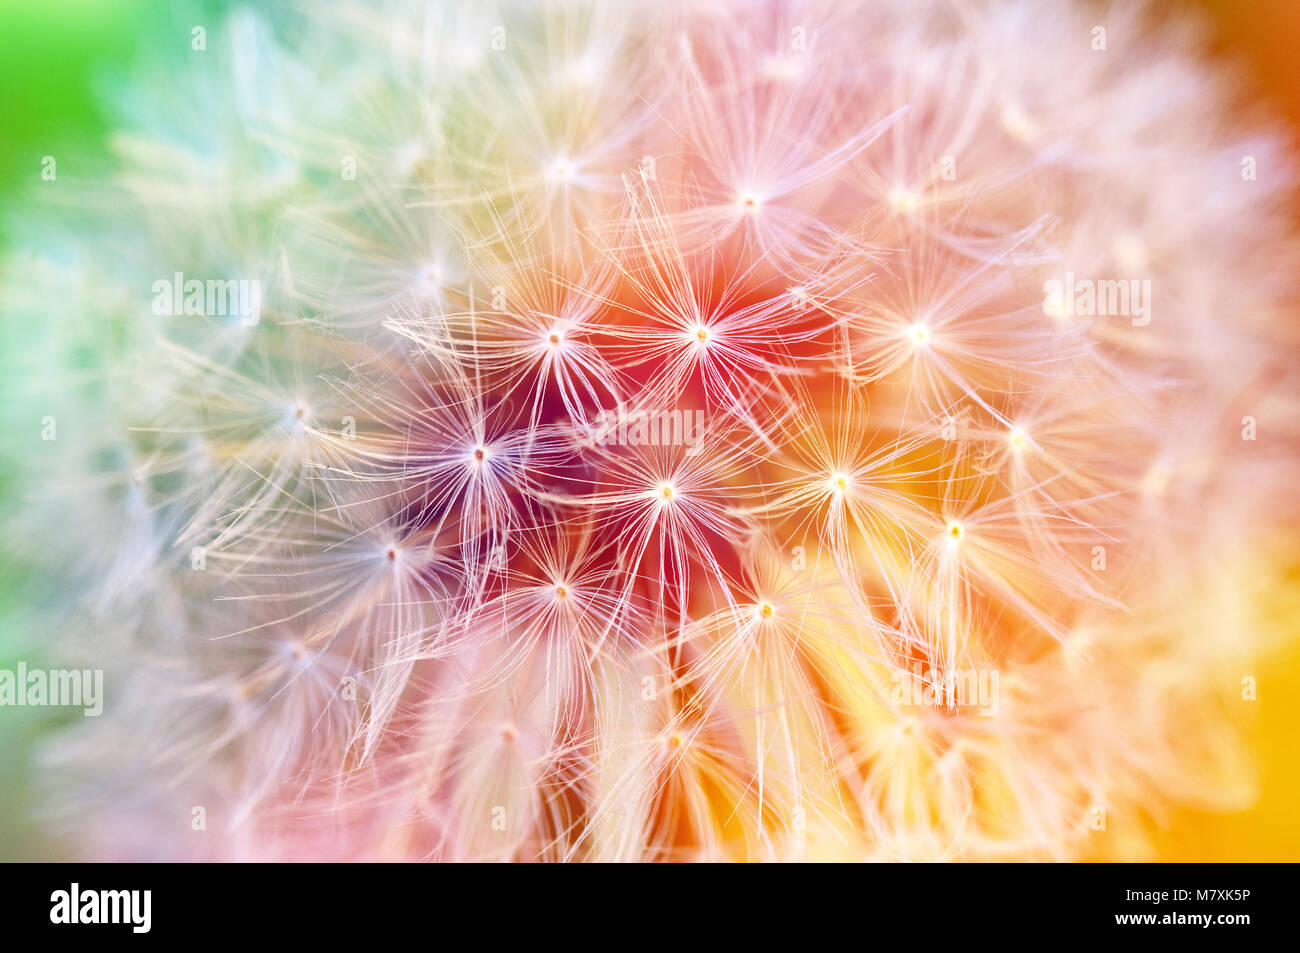 Detail of dandelion seeds, colorful background Stock Photo